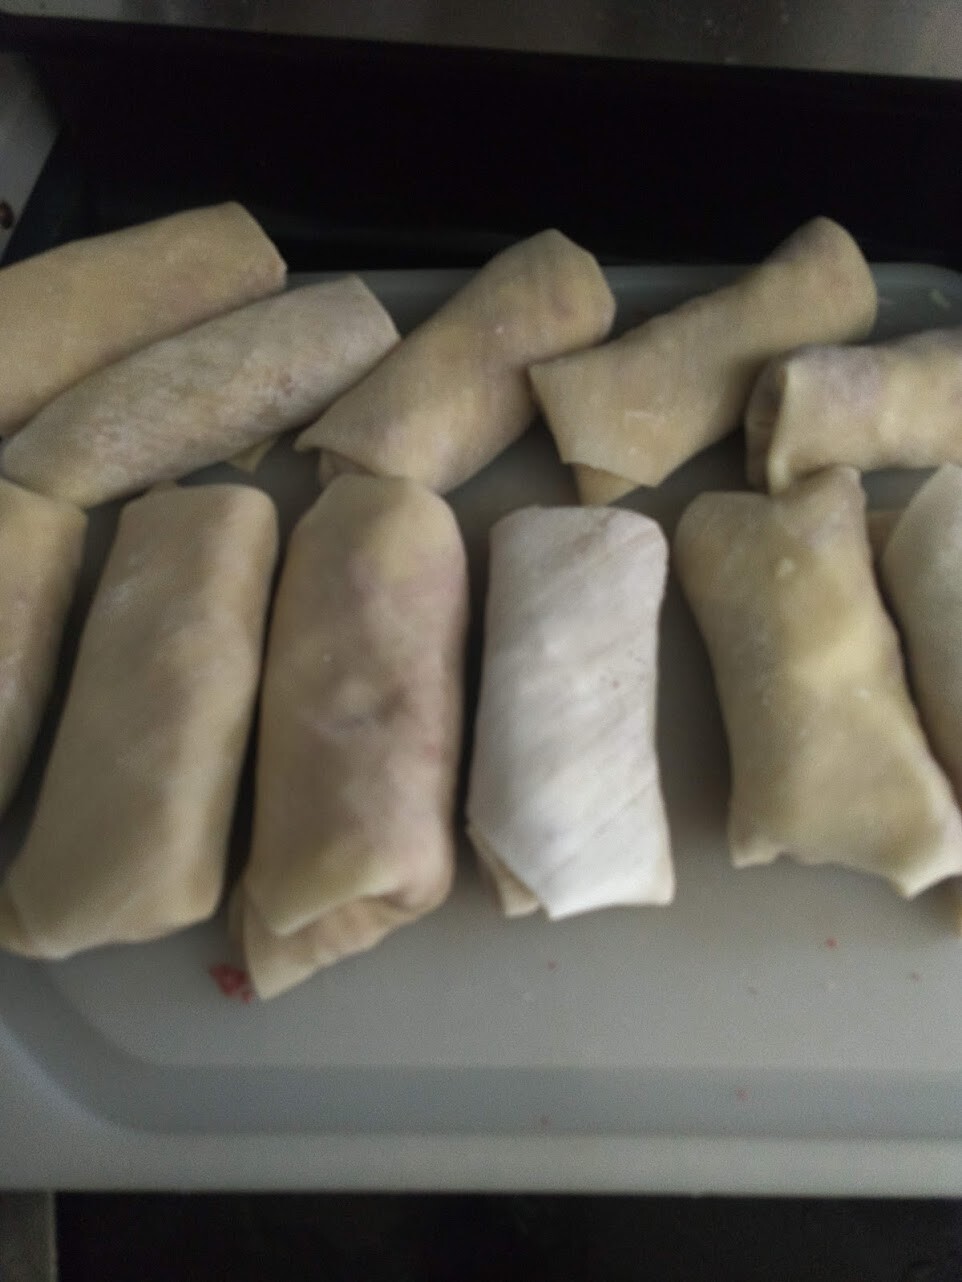 All the egg rolls filled up and ready to cook. 